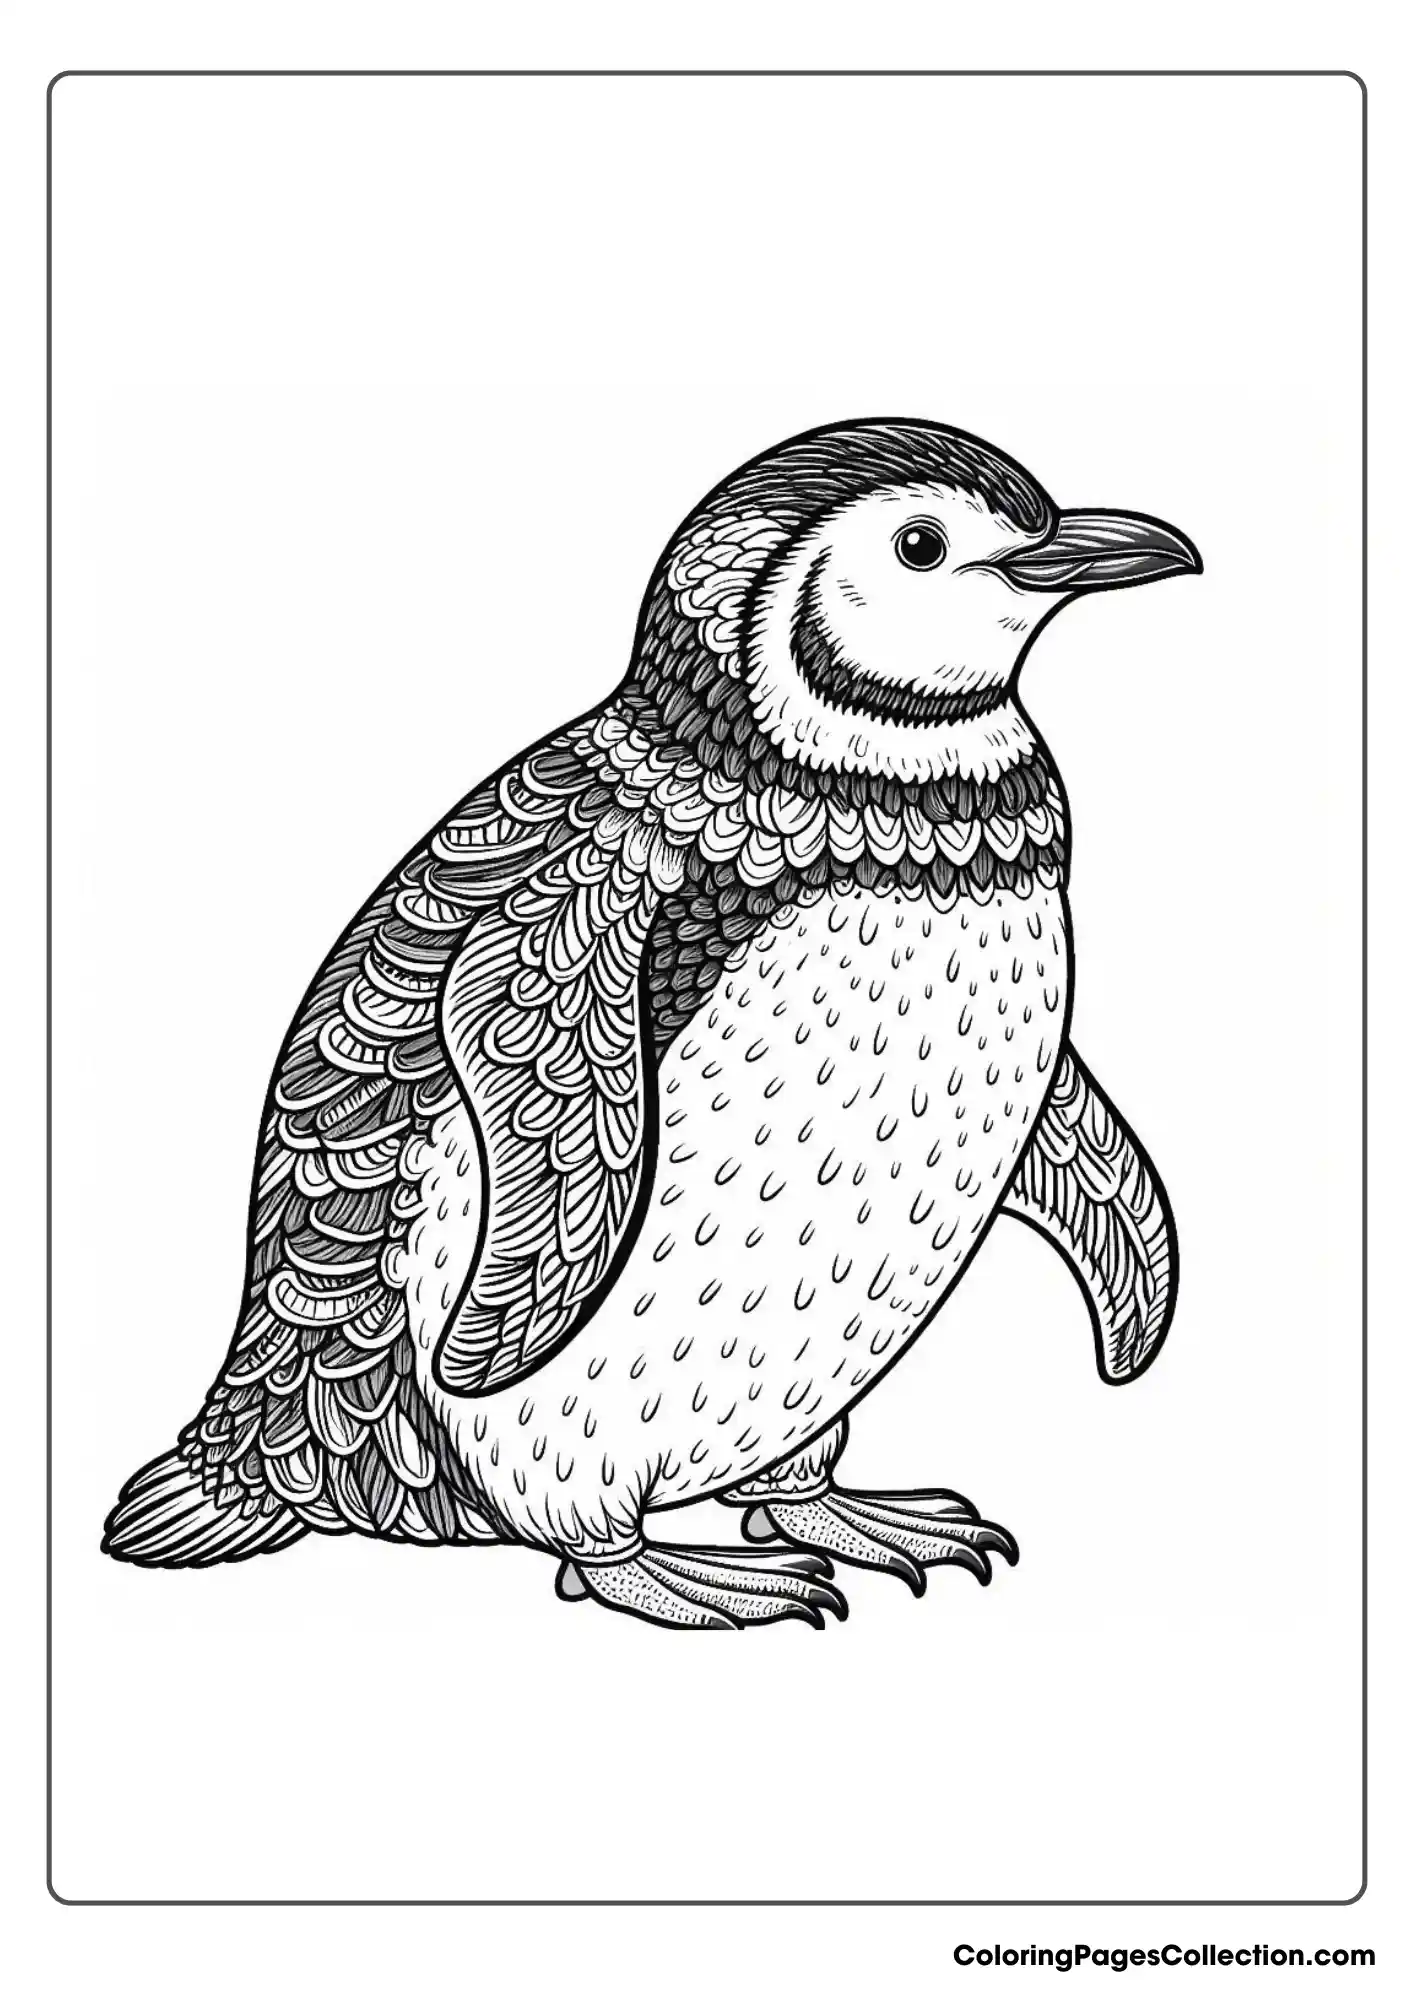 A penguin with detailed feather patterns